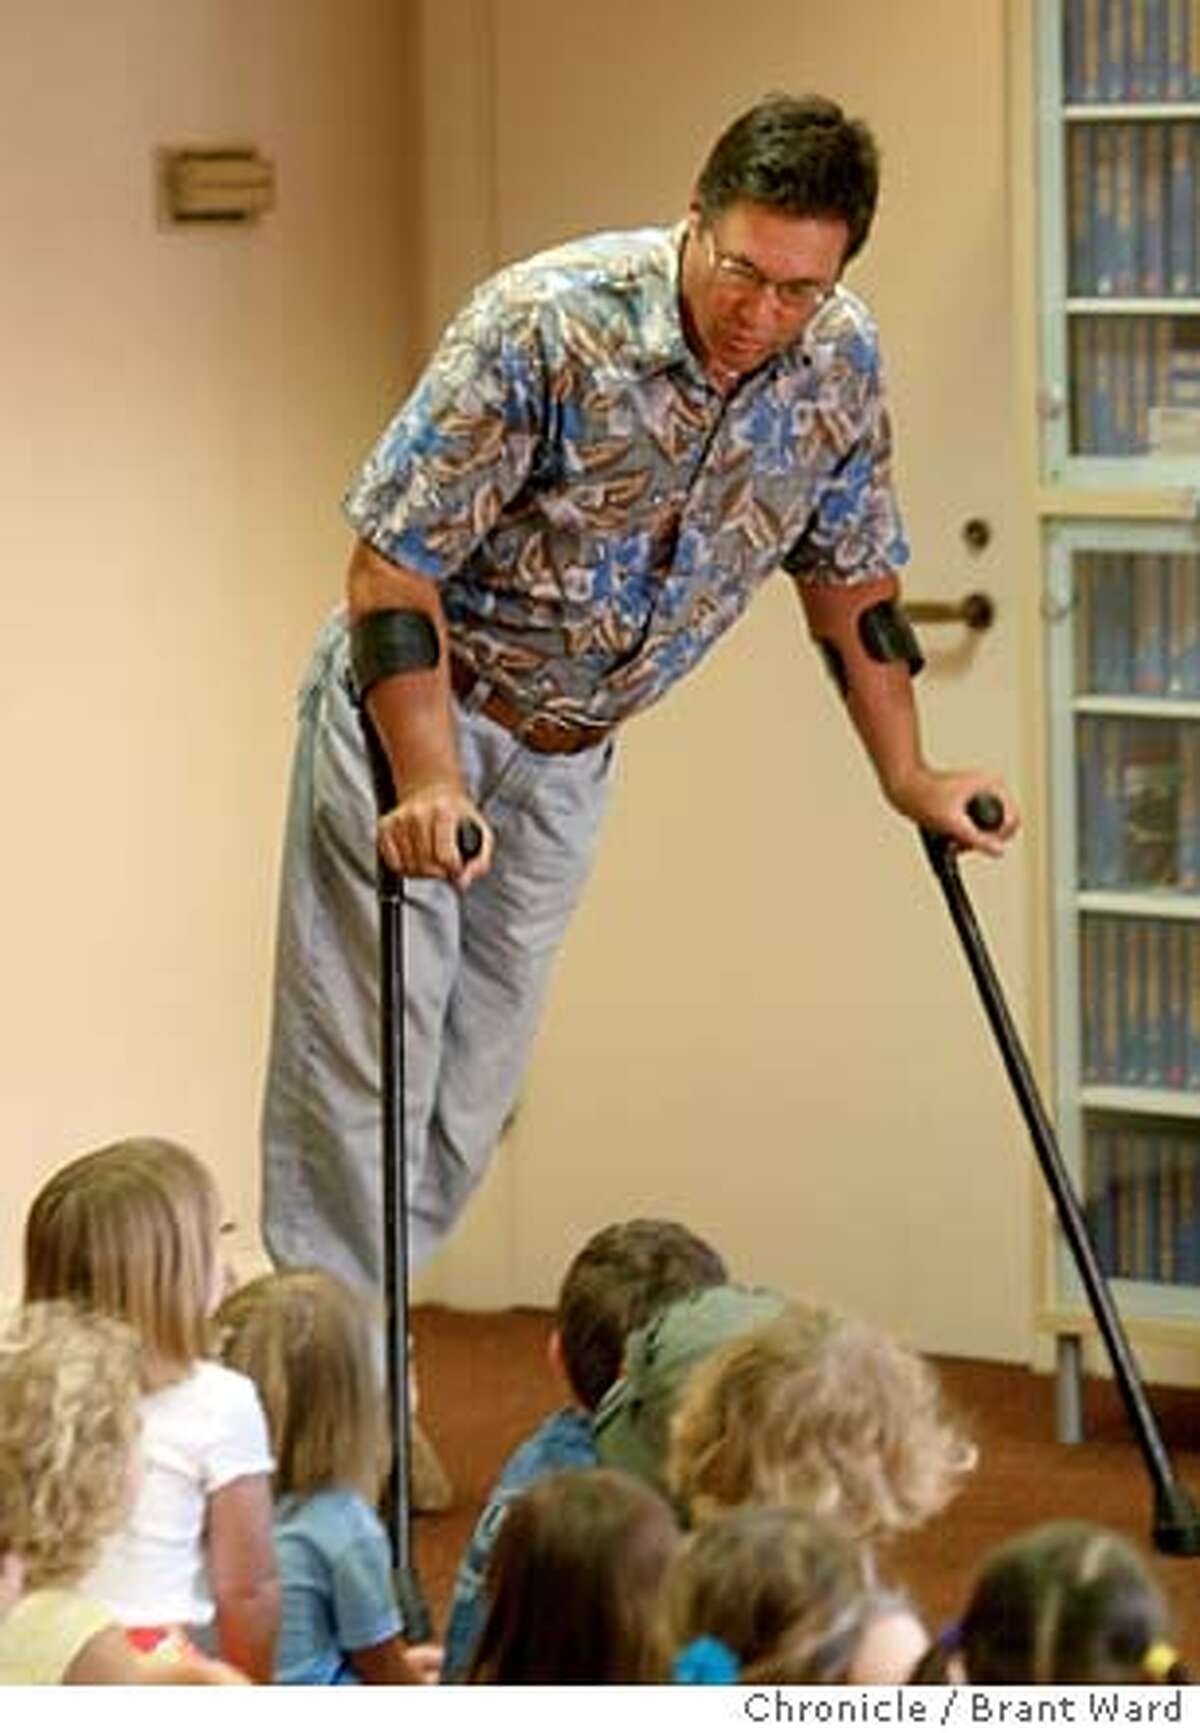 30BB0112.JPG Tim Cain contracted polio as a child. He uses crutches to get around. He calls attention to them early with a group of children...showing how he swings and walks with them. Tim Cain is a musician who does performances all over the Bay Area for children. Here he is singing for the Osher Jewish Community Center in San Rafael. BRANT WARD / The Chronicle MANDATORY CREDIT FOR PHOTOG AND SF CHRONICLE/ -MAGS OUT